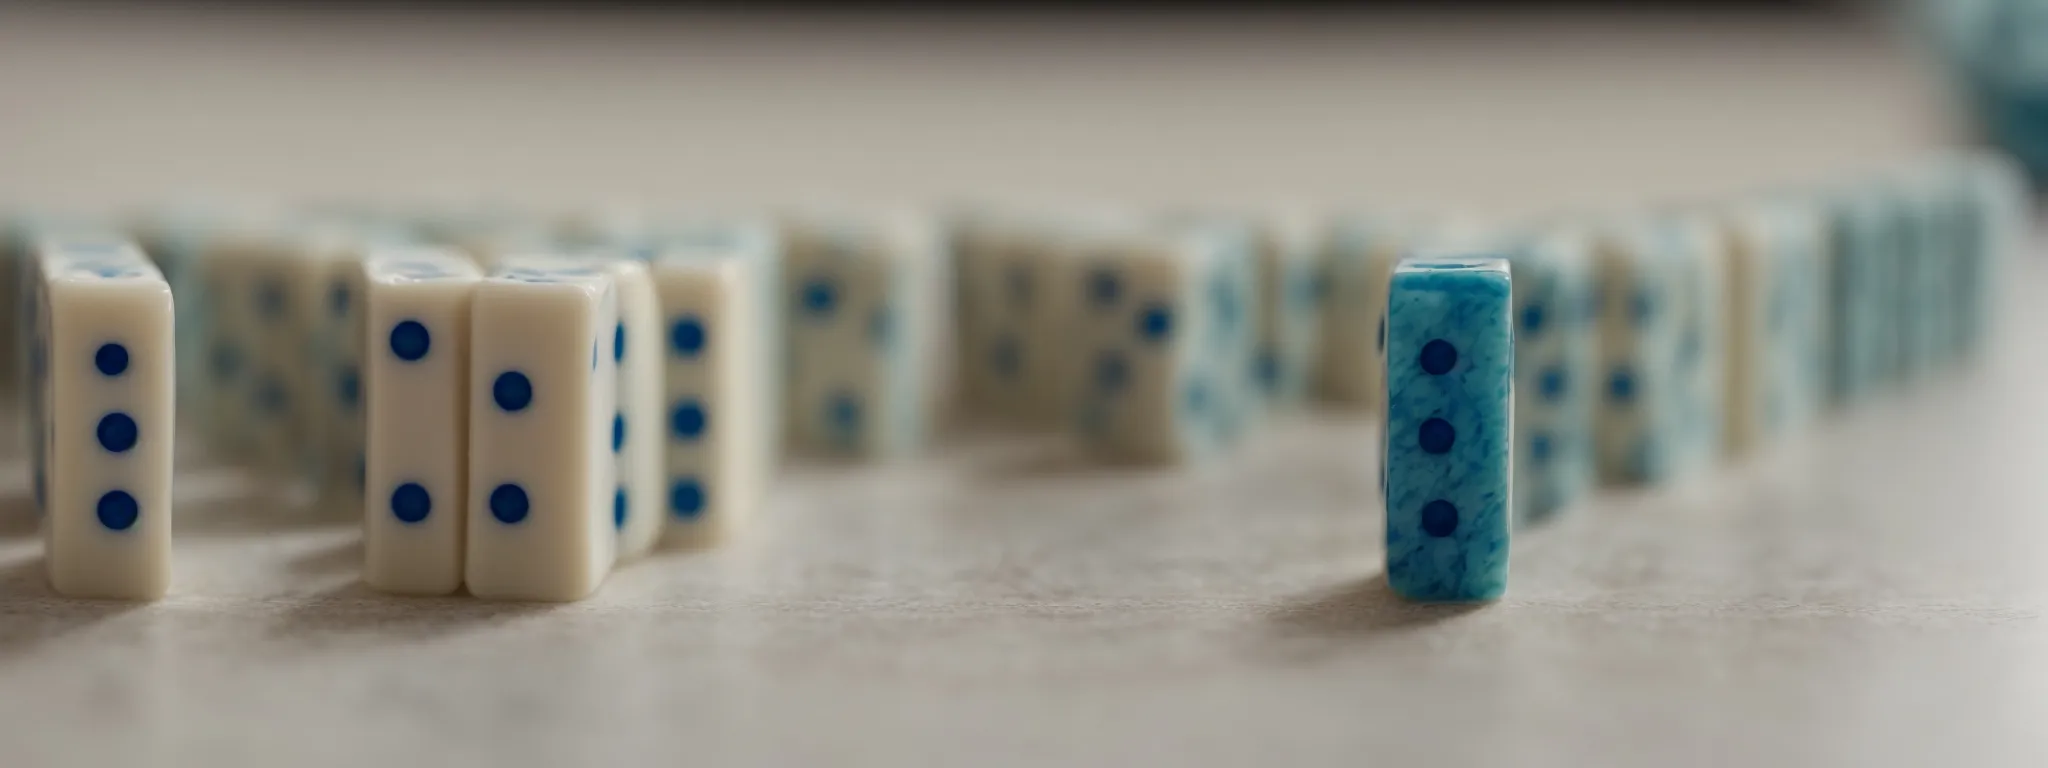 a row of dominos standing meticulously aligned, poised to illustrate the impact of initial strategic moves on long-term success.